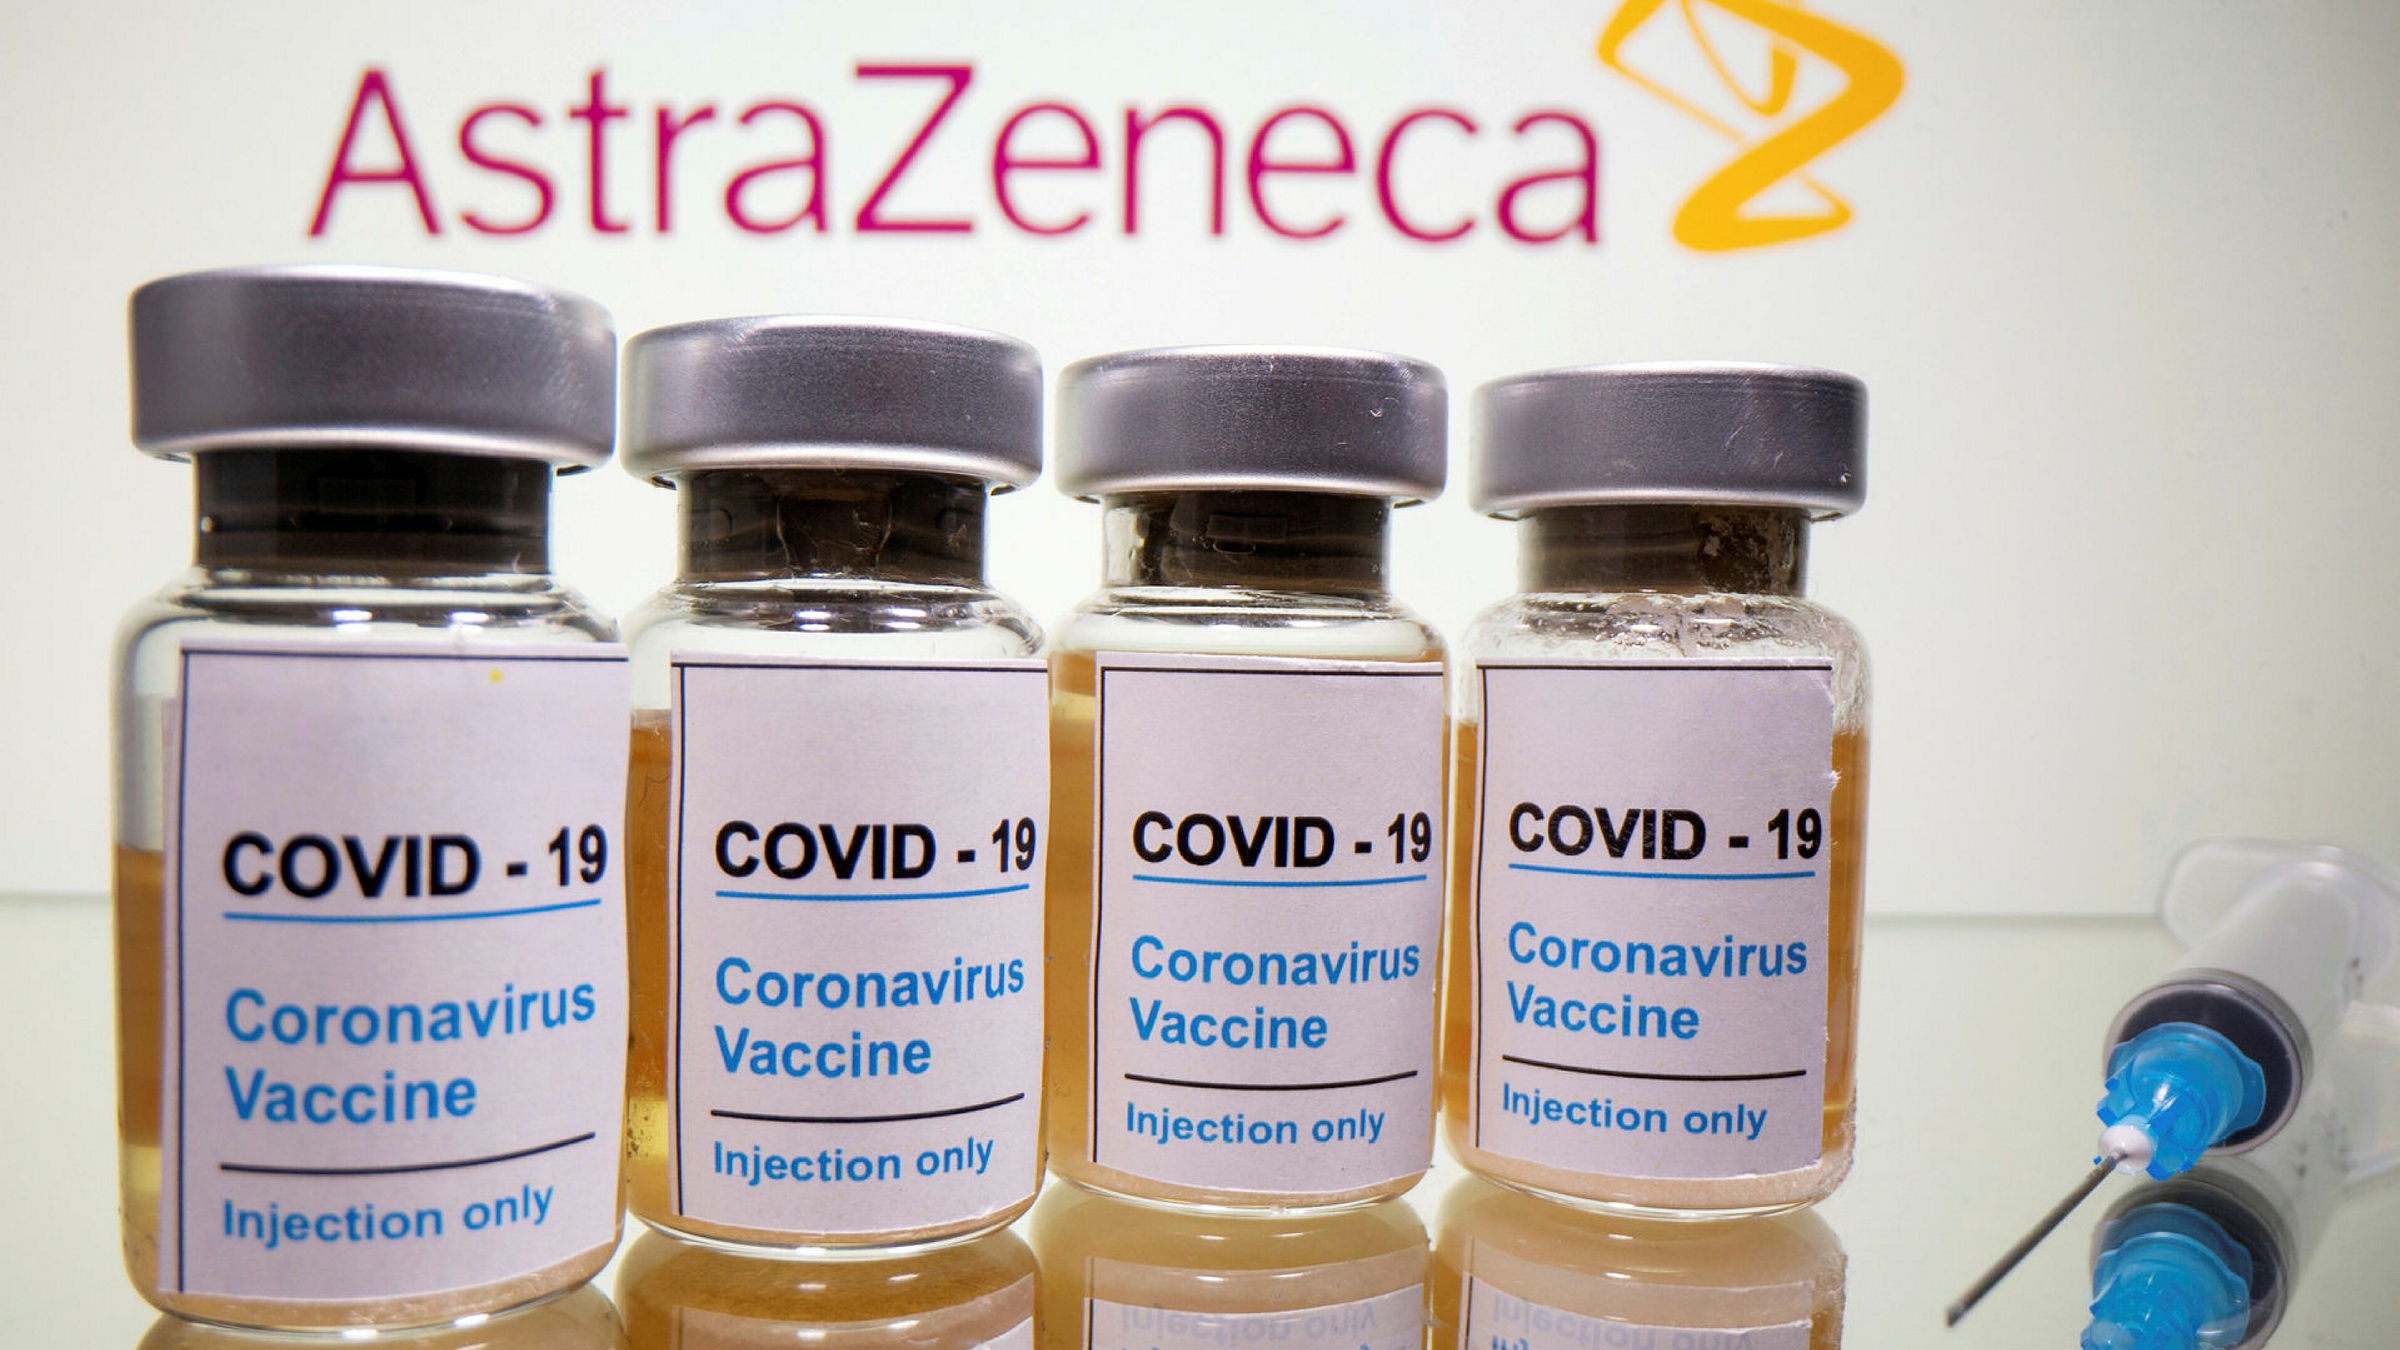 COVID-19: After UK’s approval to AZ vaccine, India may follow suit soon